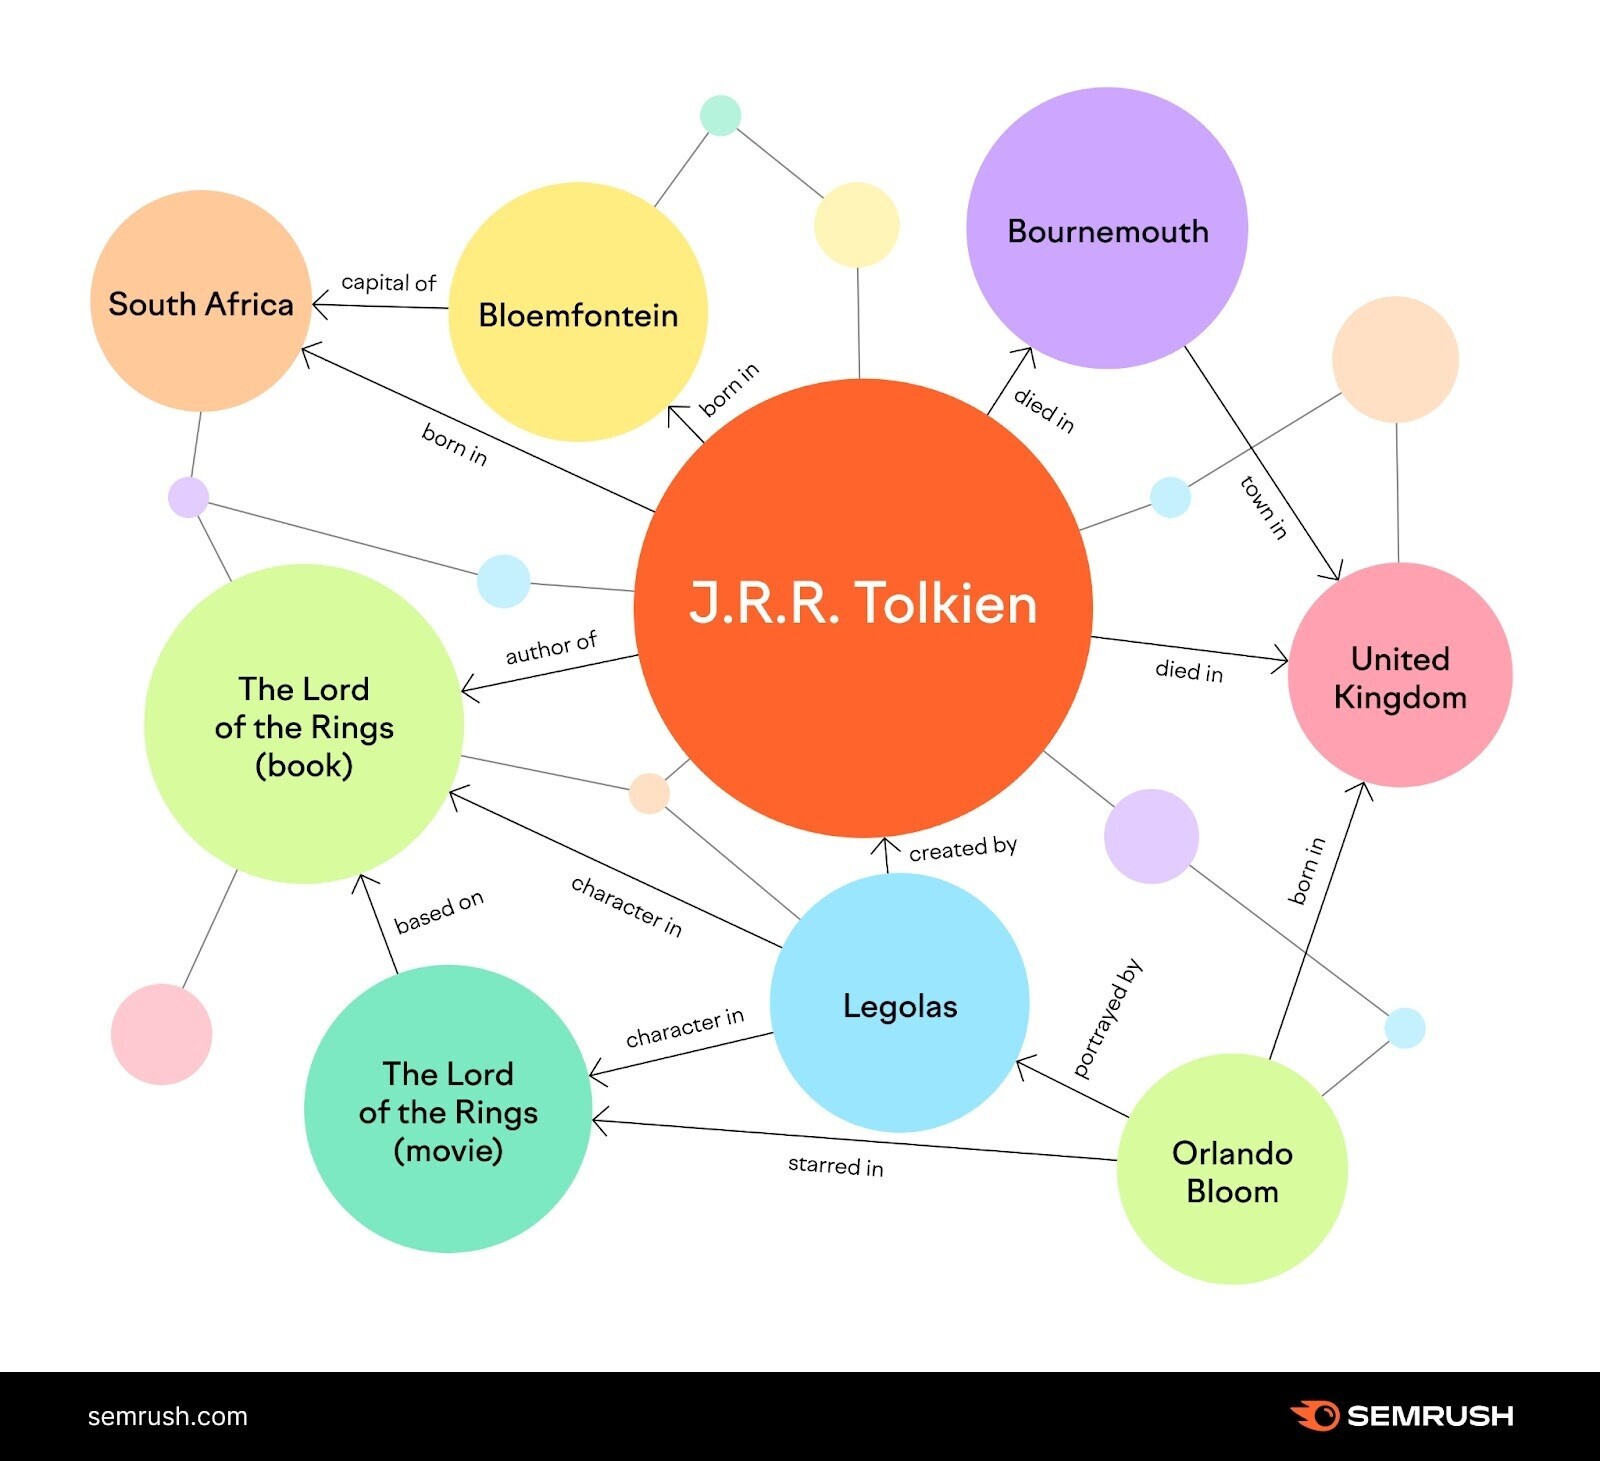 An infographic by Semrush showing a mind map related to "J.R.R. Tolkien"